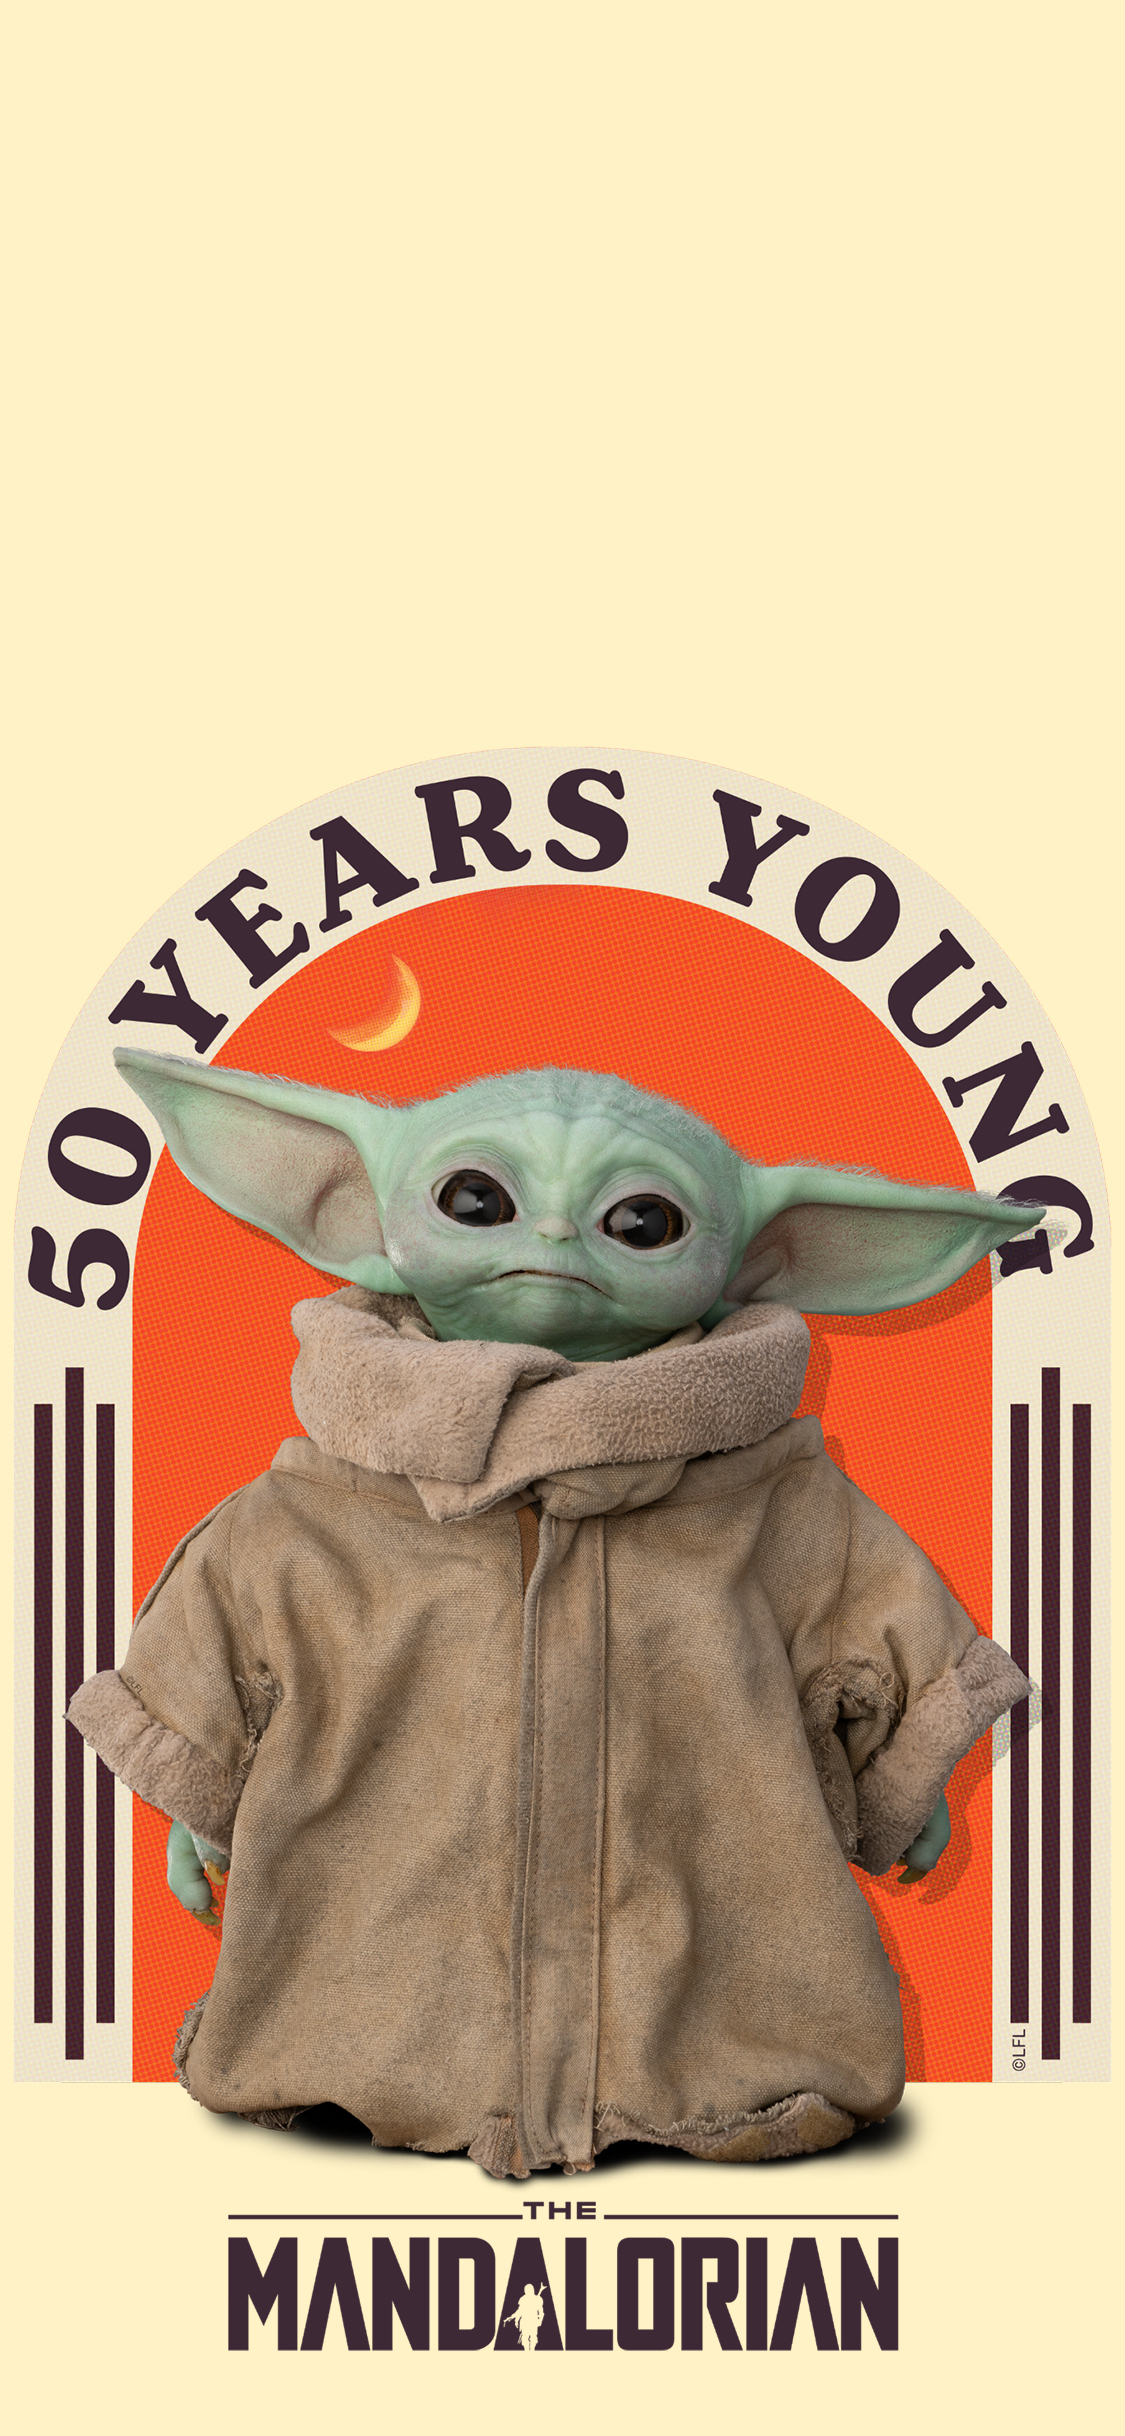 Baby Yoda Iphone X Wallpaper Collection Youloveit Com